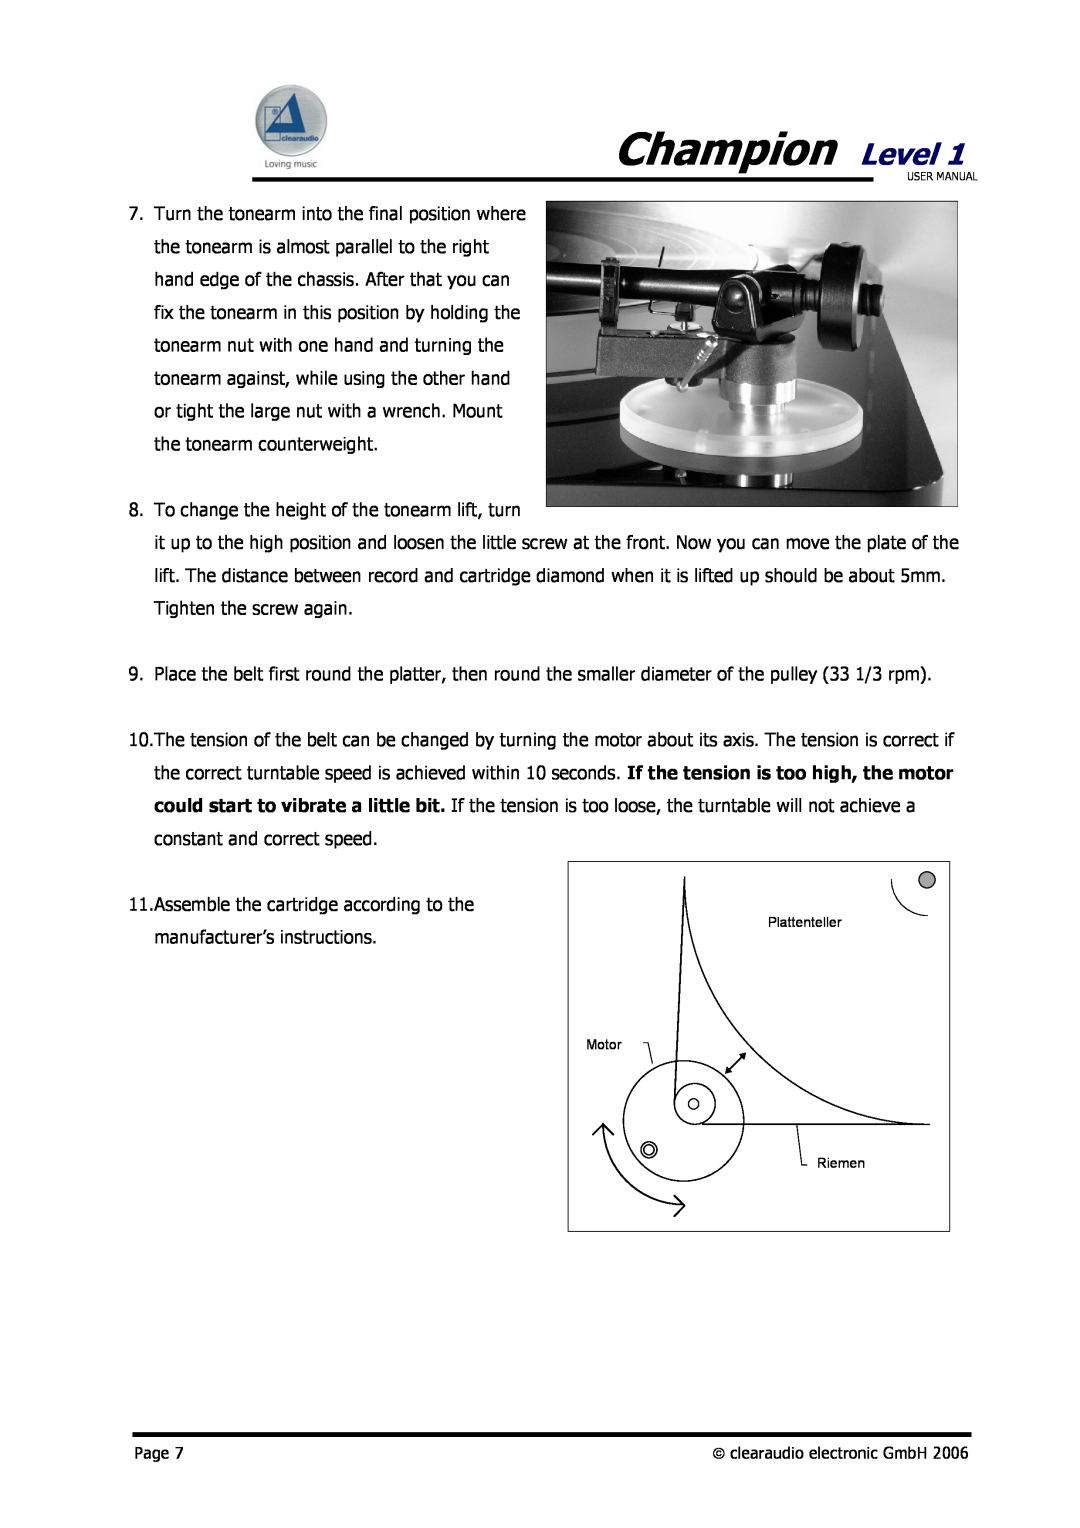 Clearaudio user manual Champion Level, To change the height of the tonearm lift, turn 